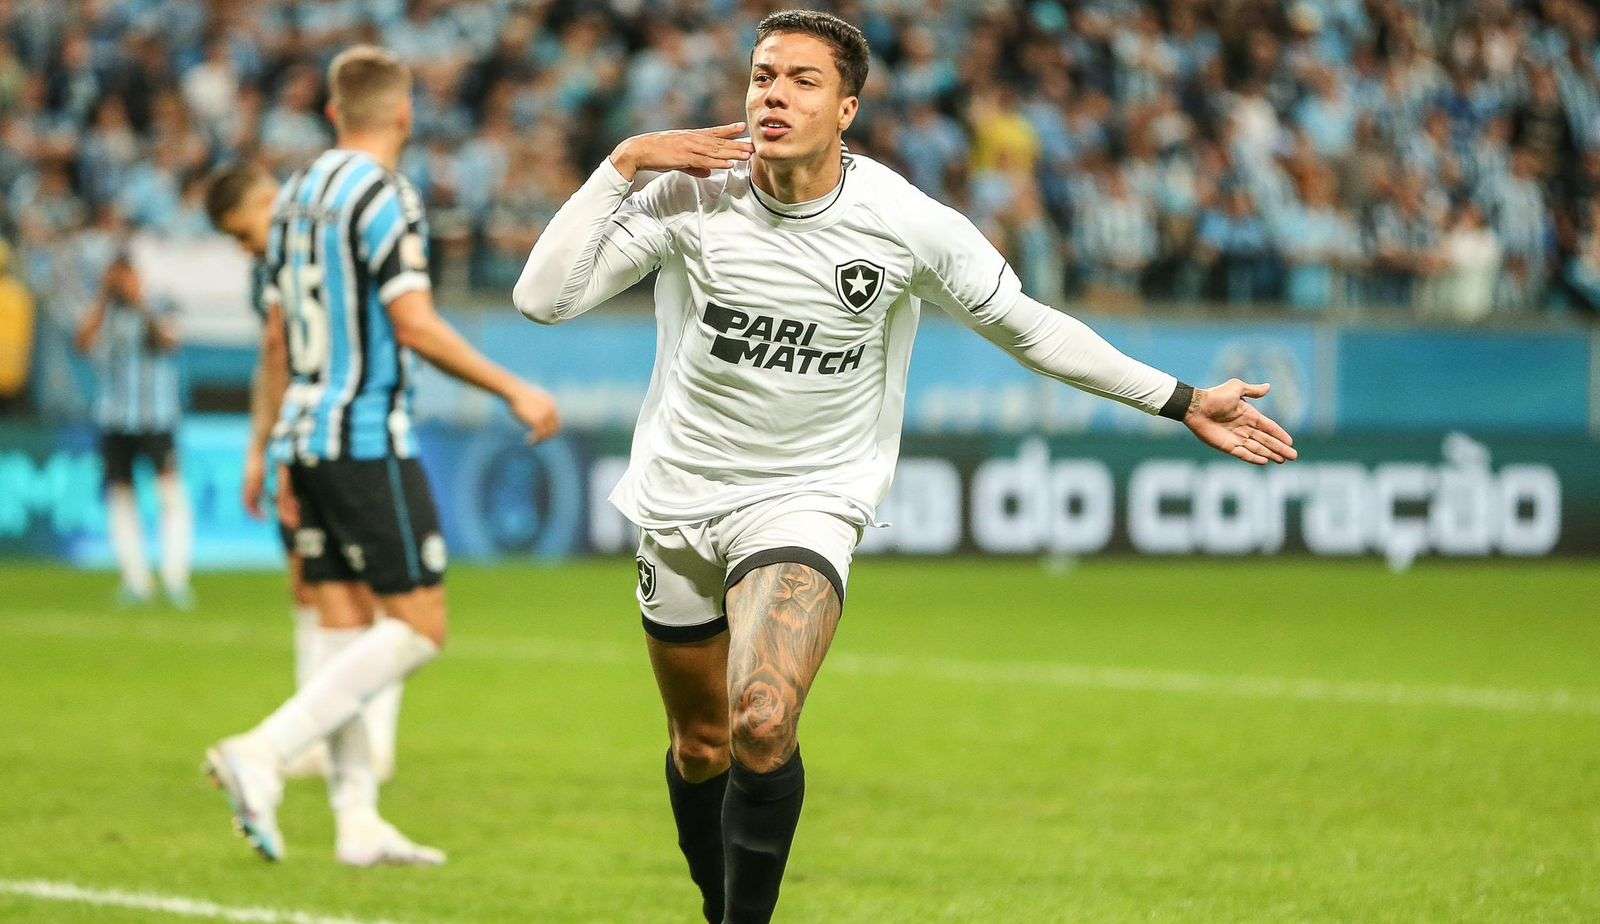 Botafogo crushes Grêmio by 2x0 and remains leader in the